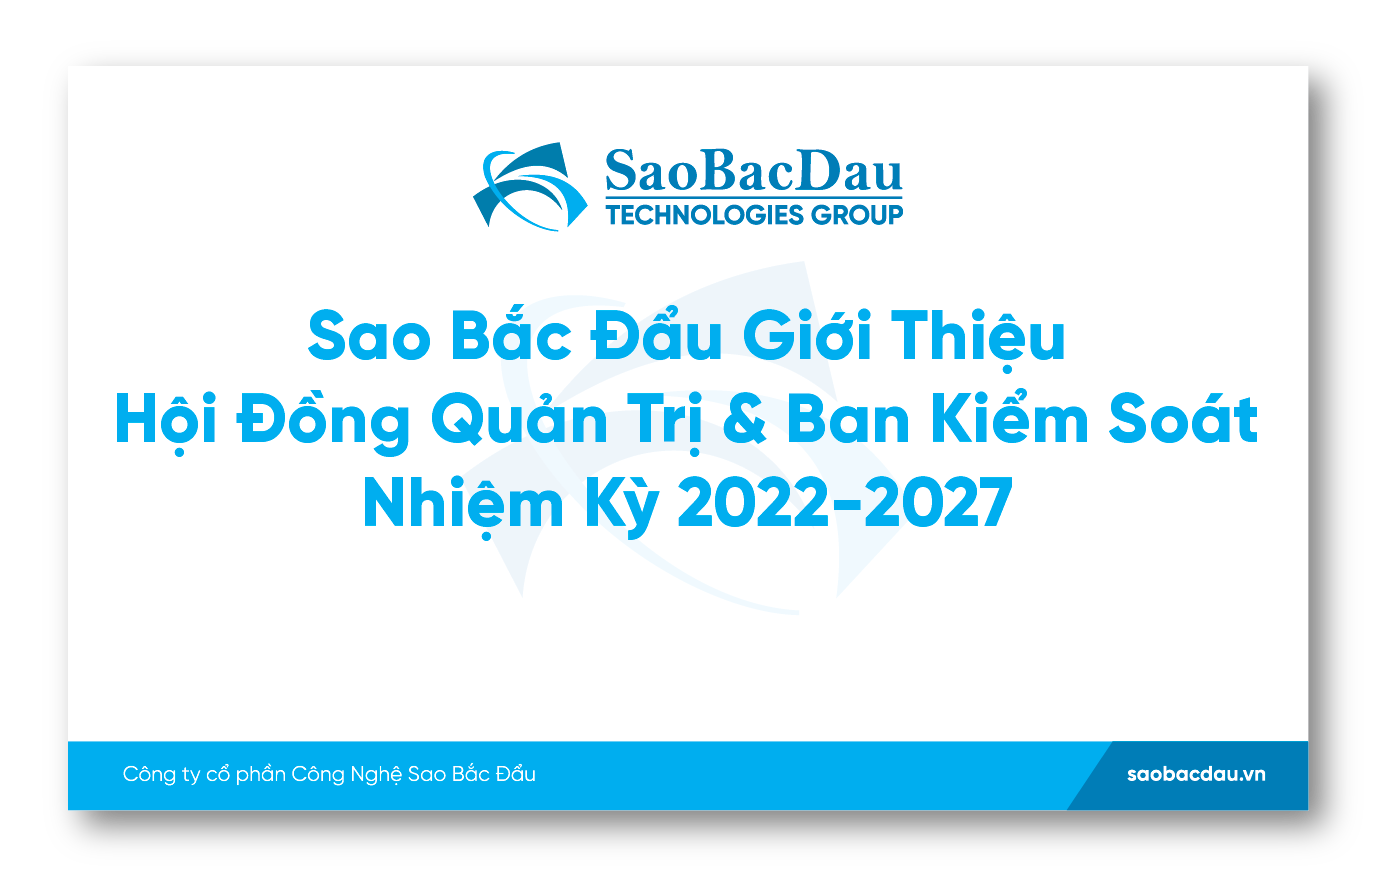 Sao Bac Dau introduced the Board of Directors & Supervisory Board for the term of 2022-2027